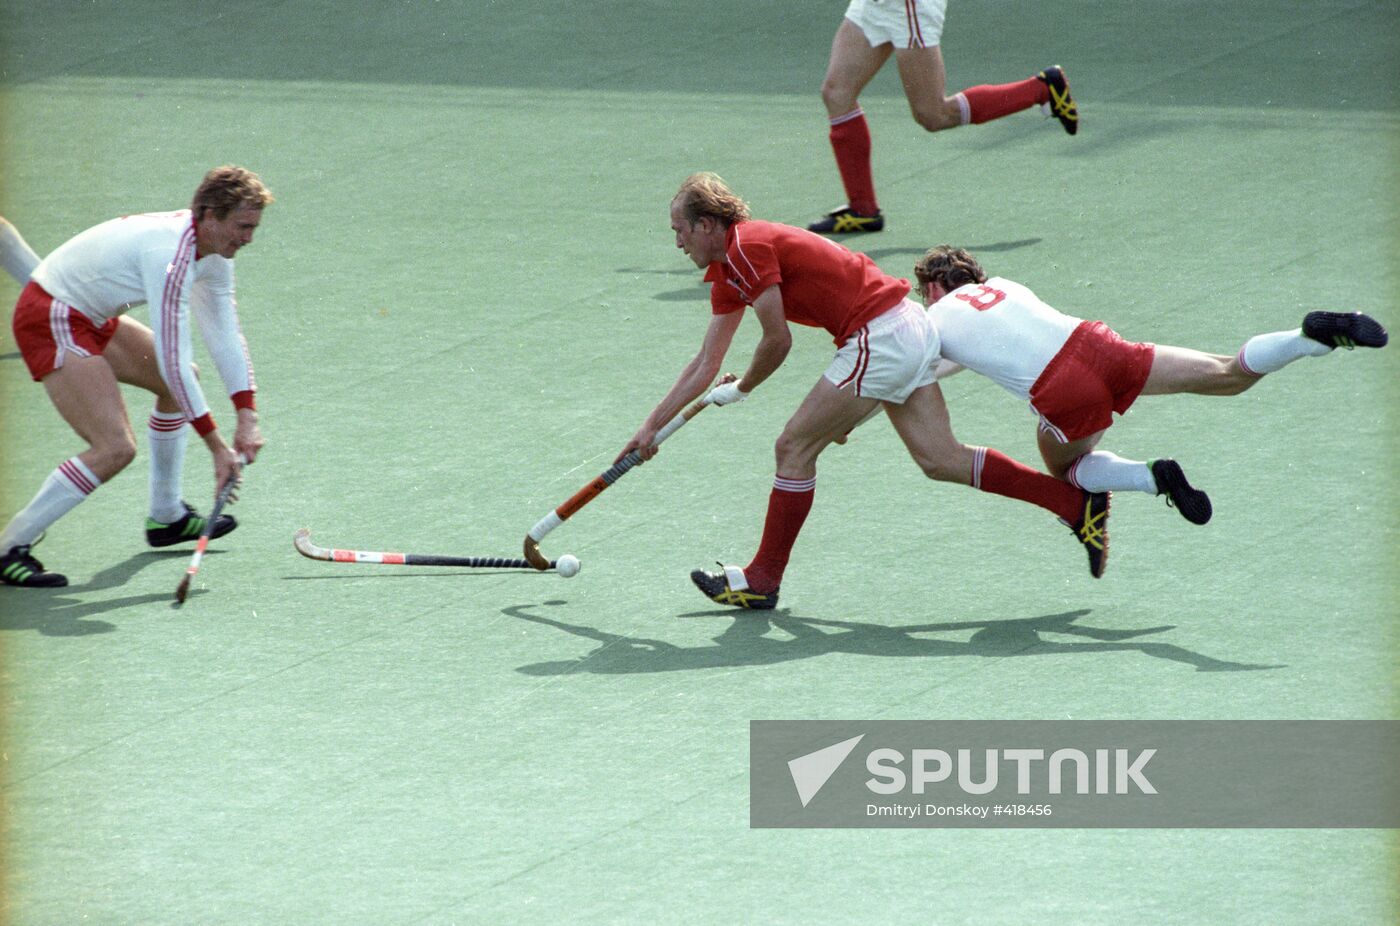 22nd Olympic Games in Moscow. Field hockey